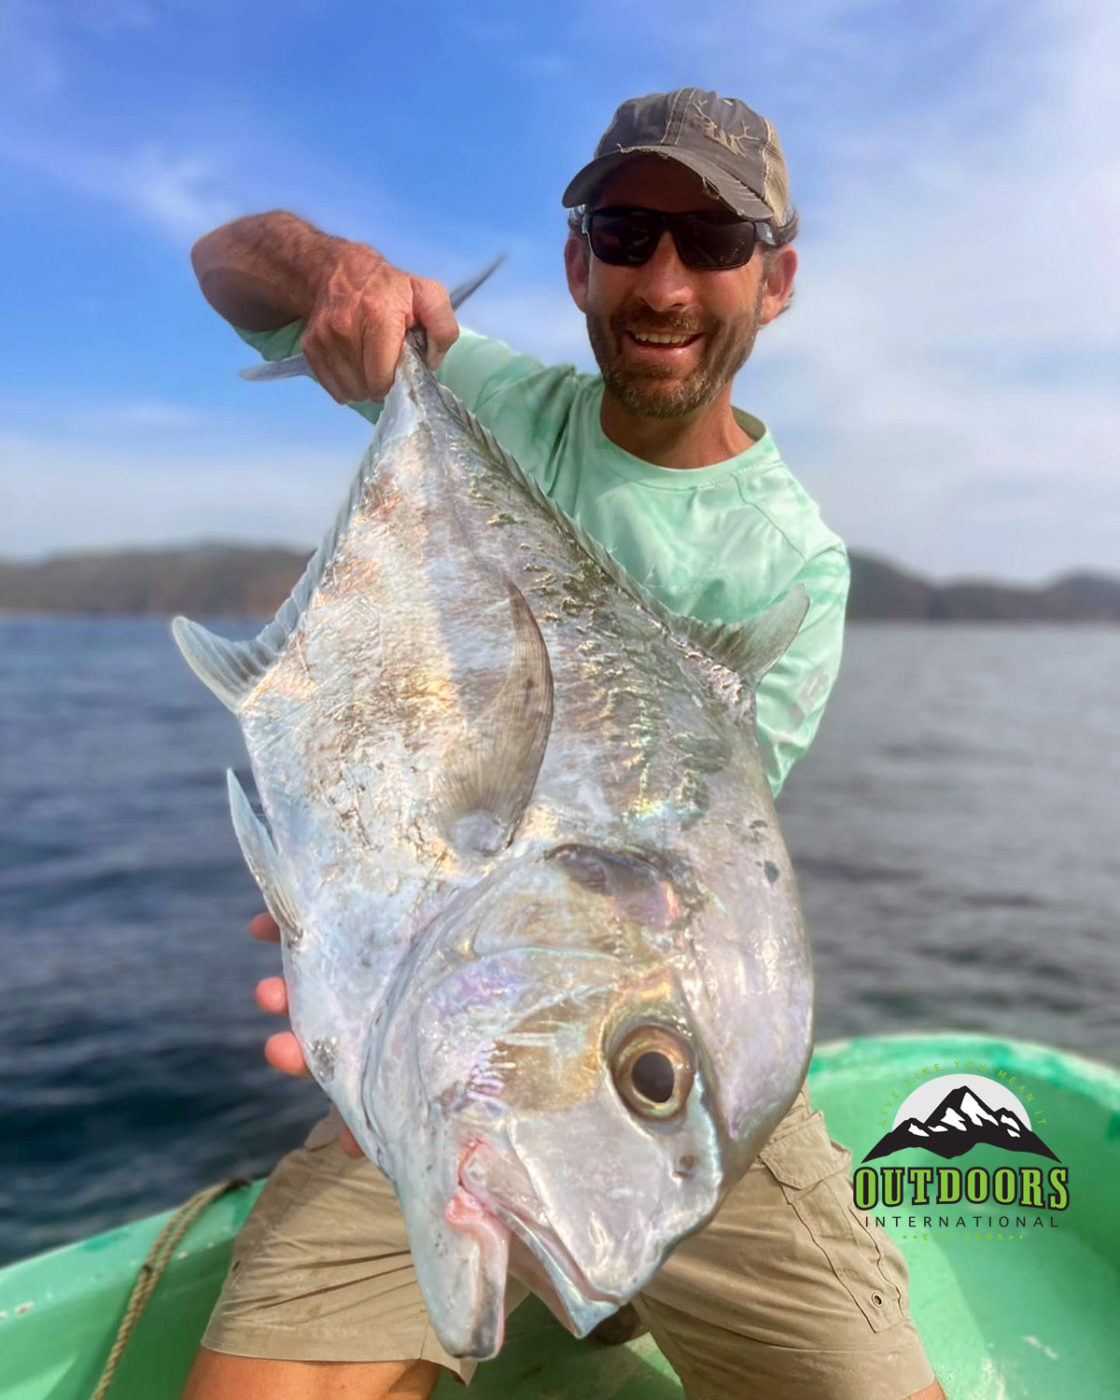 Mexico Fishing Lodge Report by Scott Turner » Outdoors International